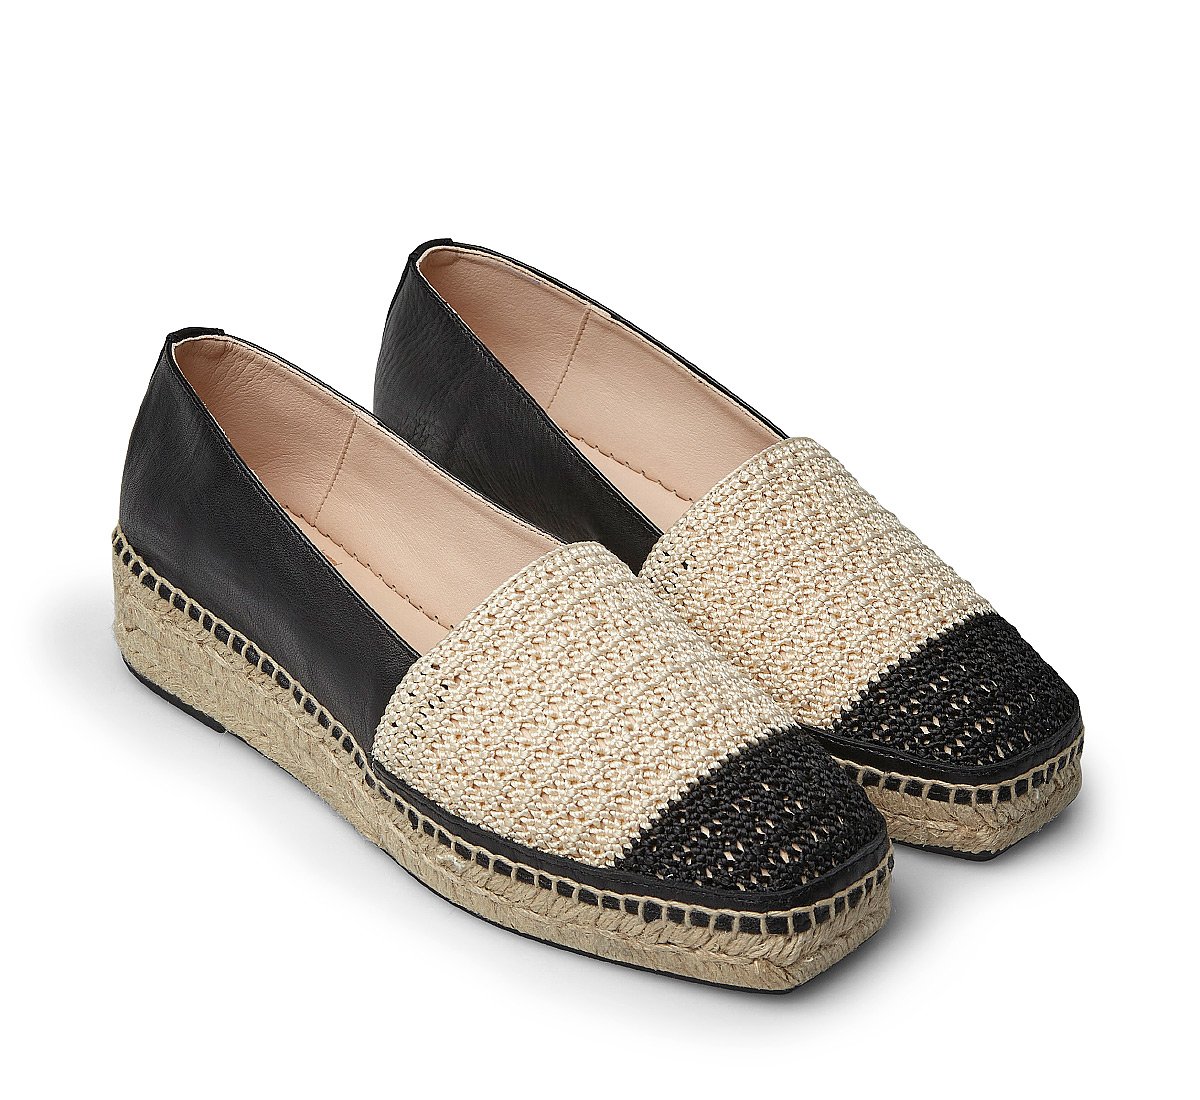 Espadrilles in nappa leather